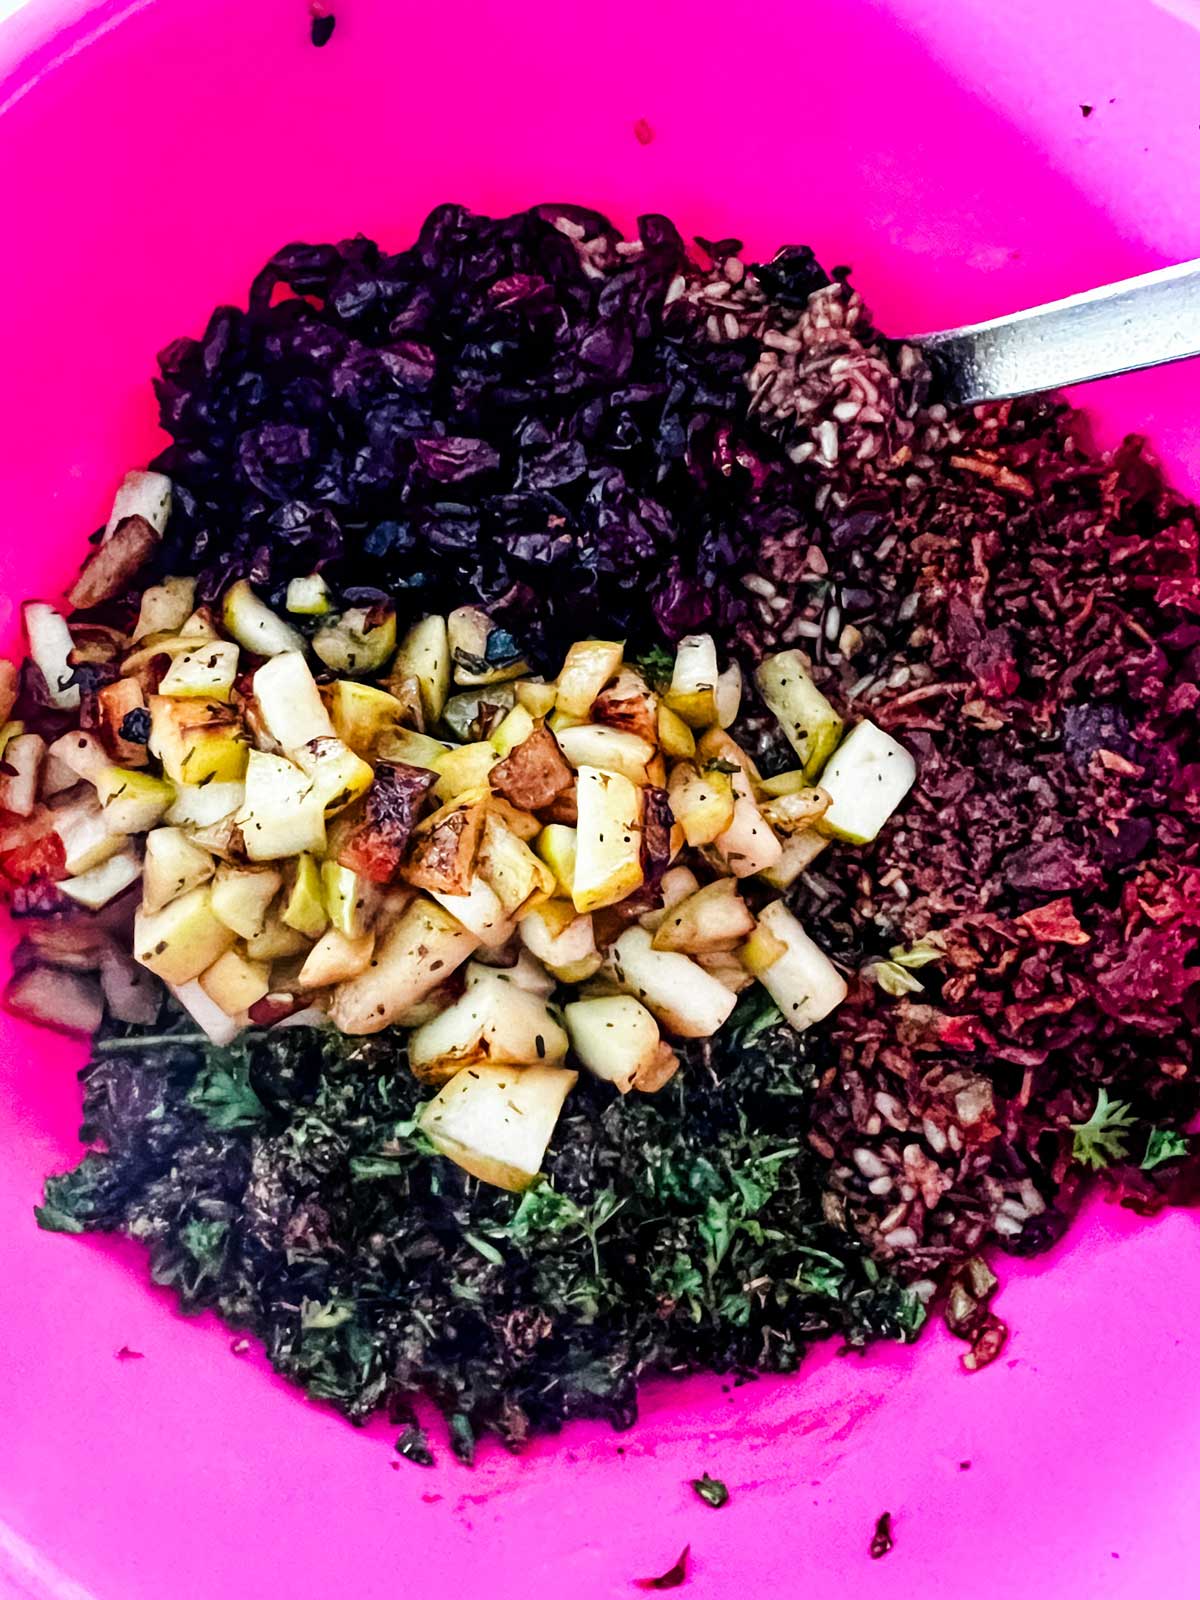 Wild rice, cranberries, apple, and parsley in a large pink bowl.